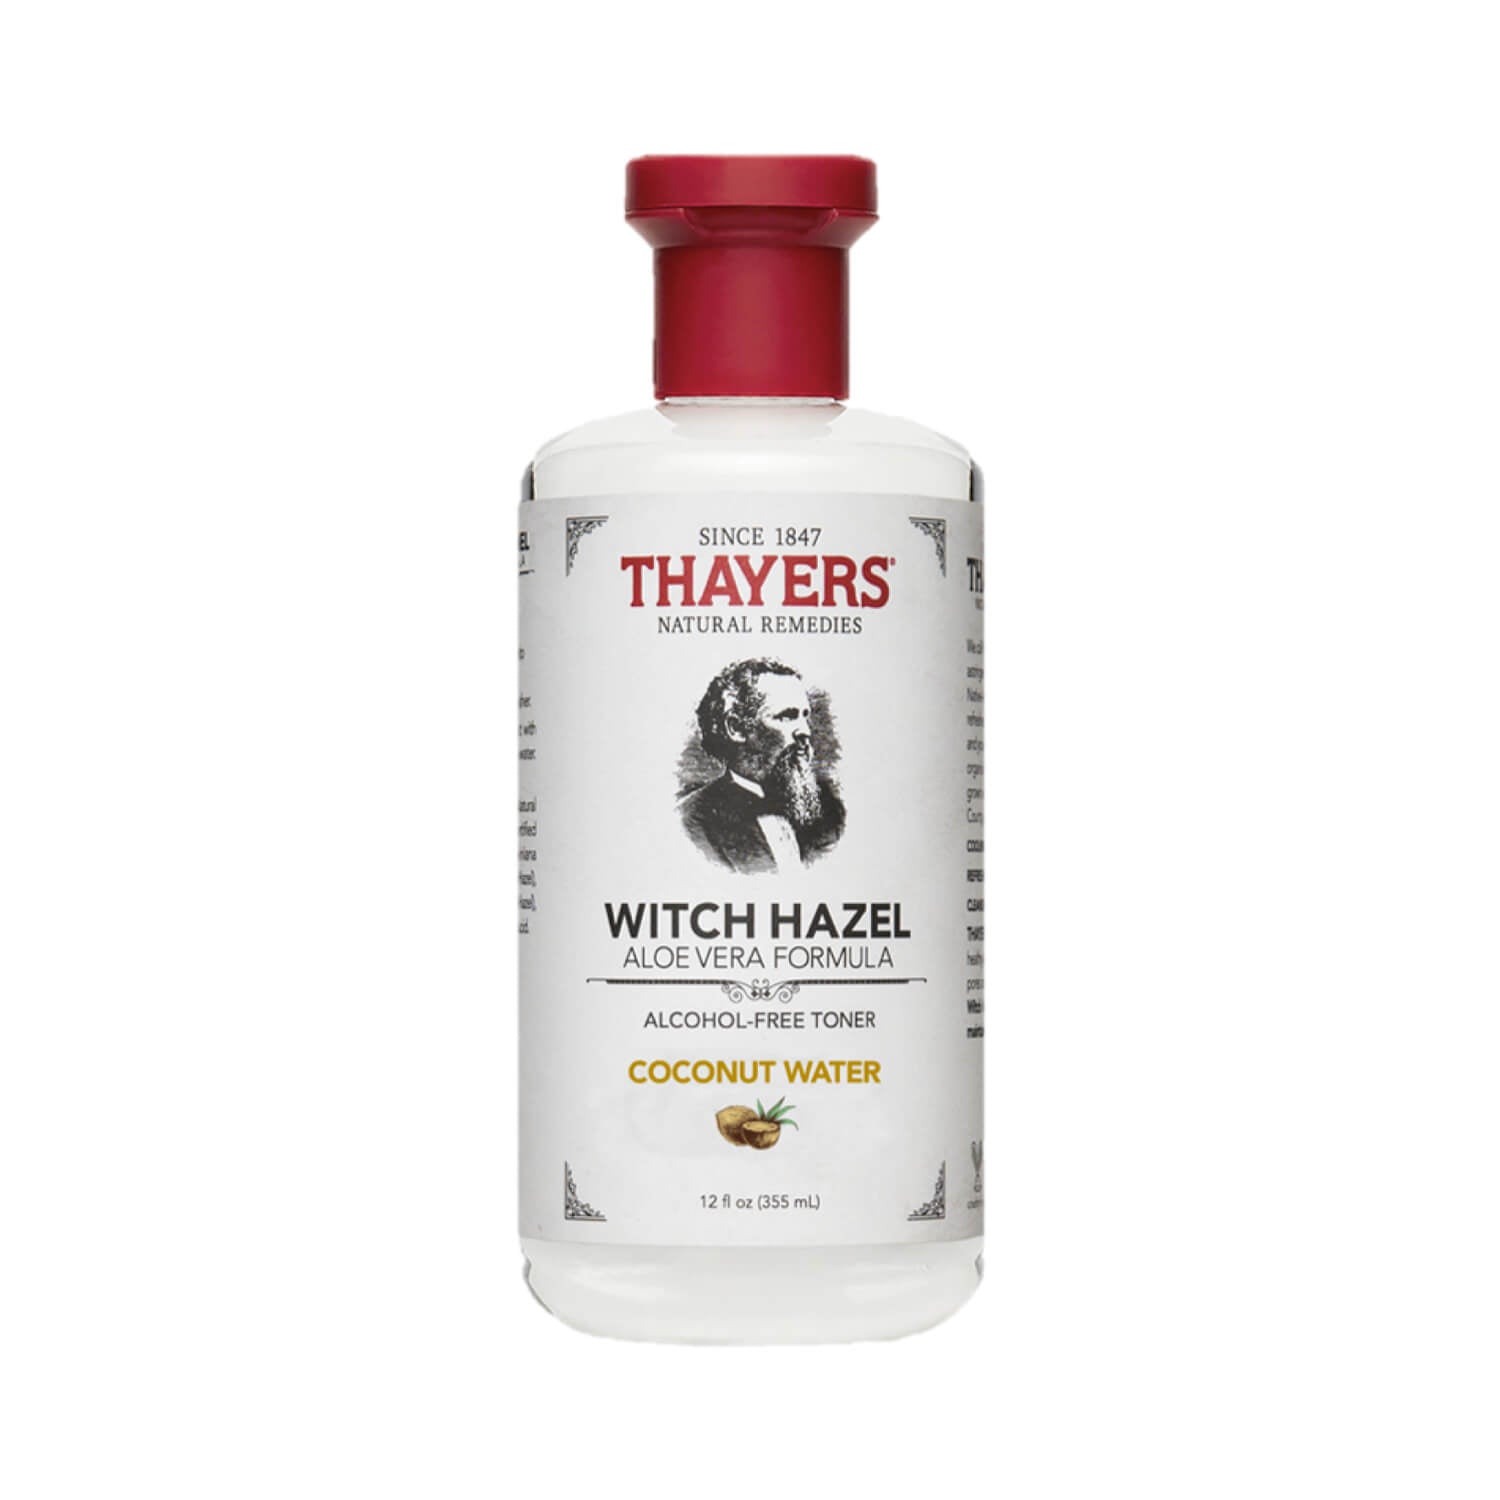 Thayers Alcohol-Free Coconut Water Witch Hazel Toner